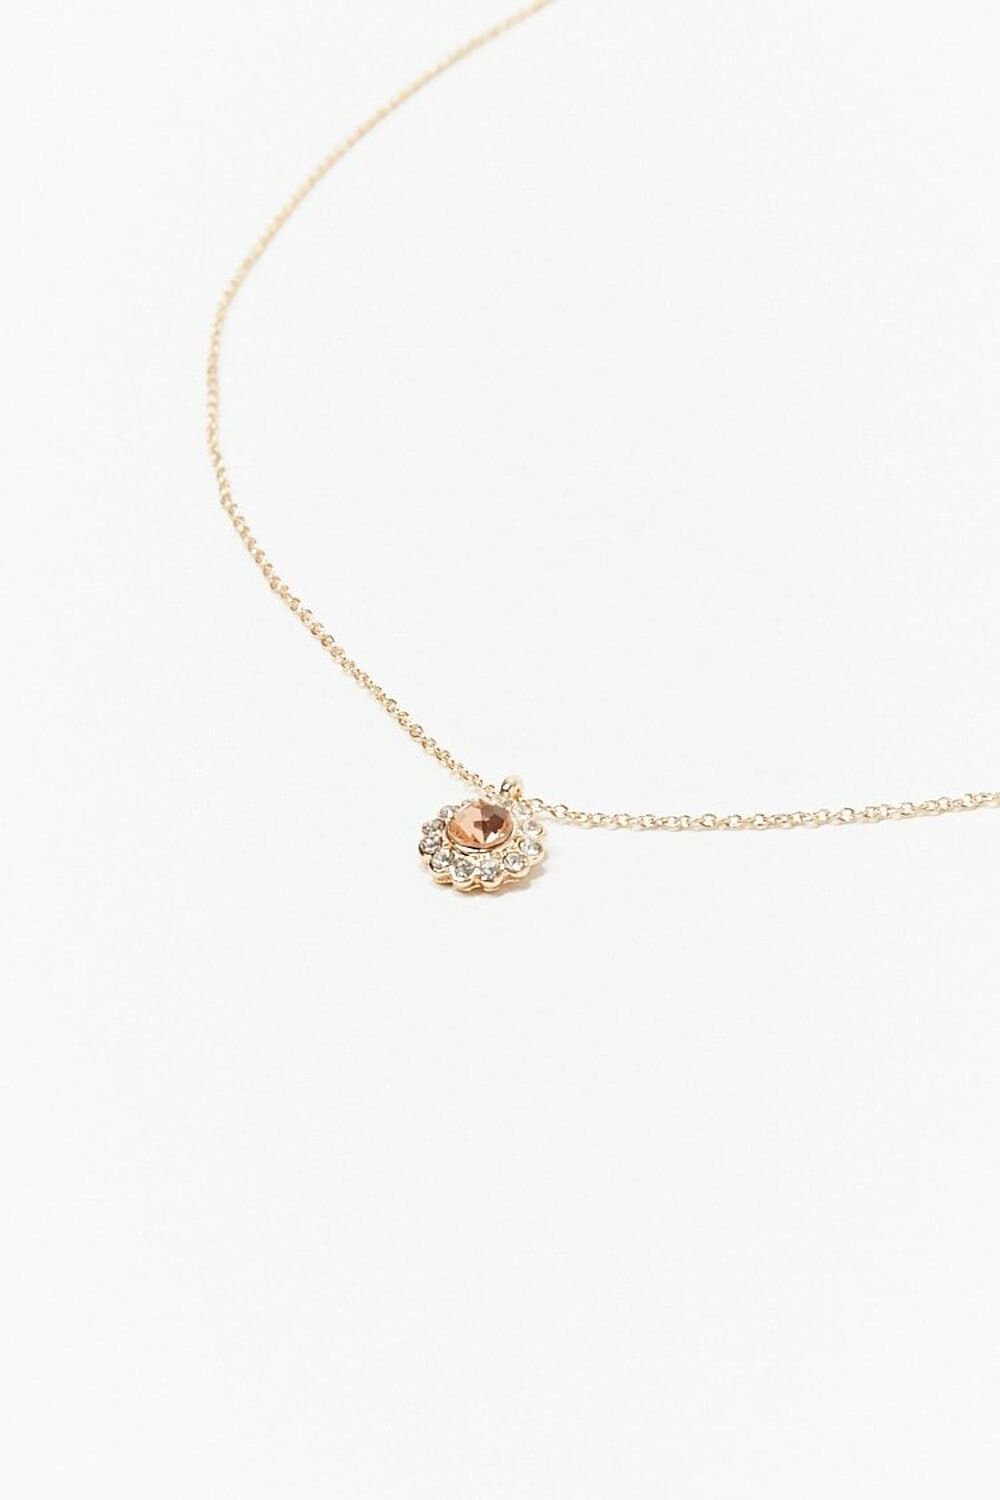 GOLD/PEACH Rhinestone Floral Charm Necklace, image 1